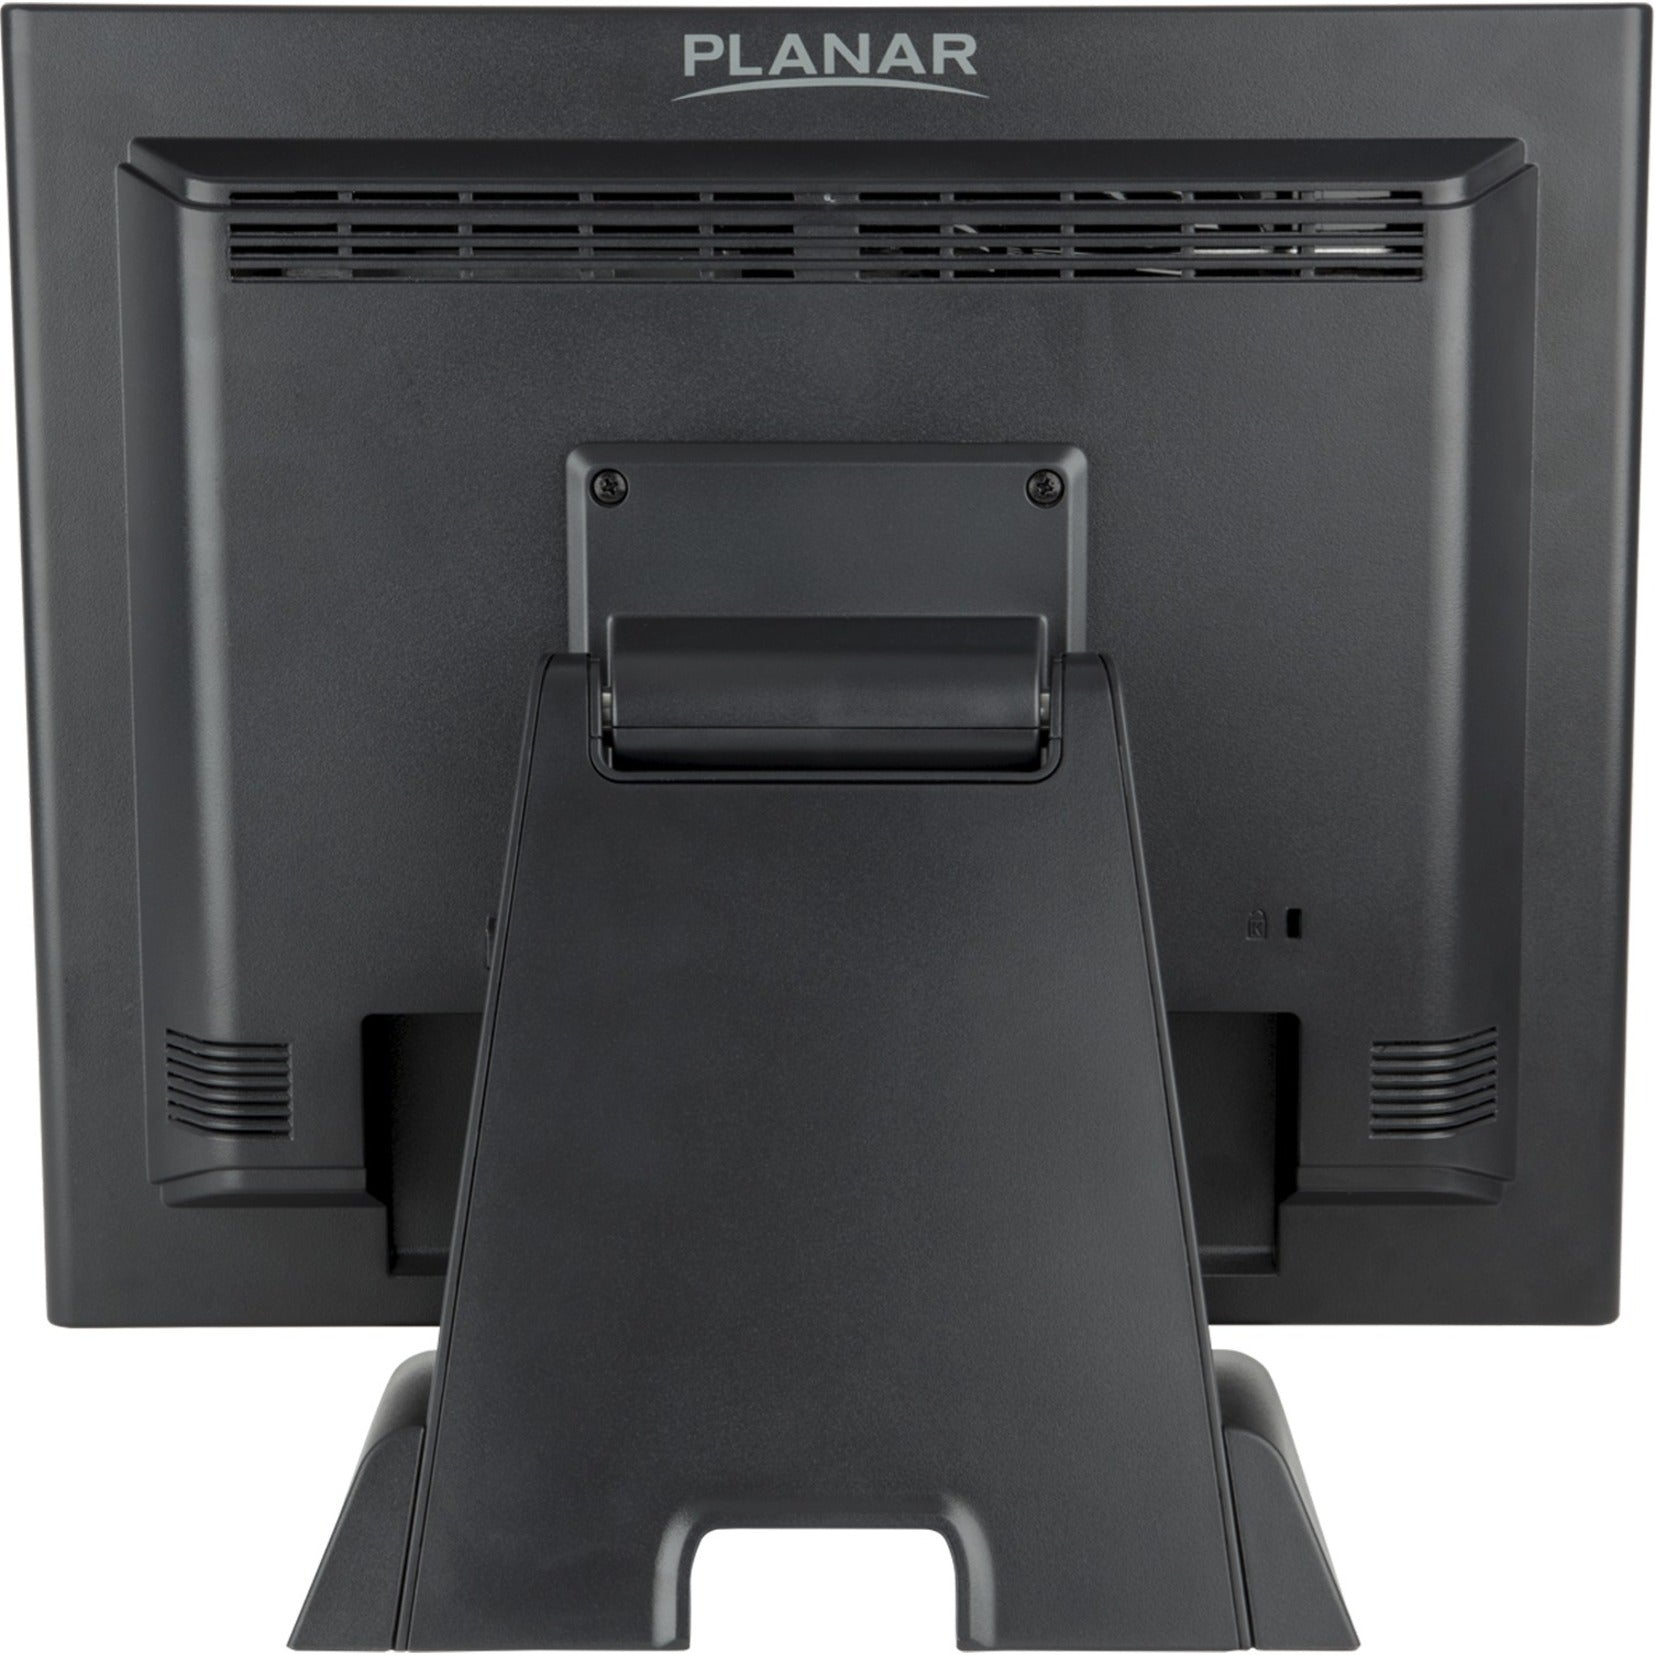 Planar 997-7413-01 PT1545P 15" Touch Screen Point Of Sale Monitor, Black